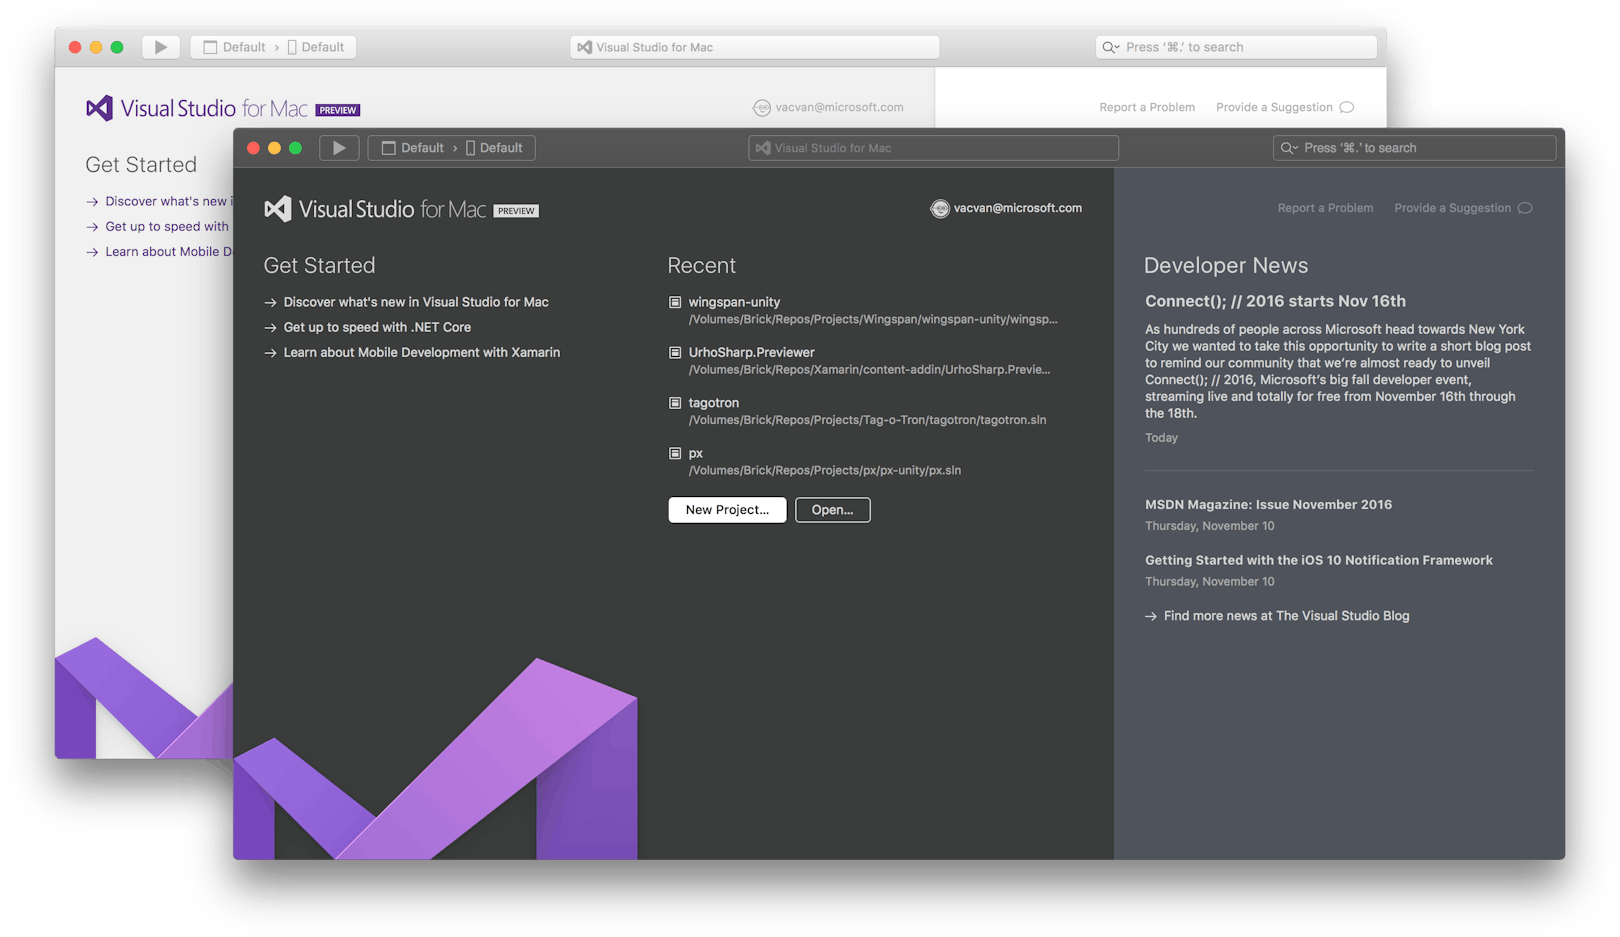 Welcome Screen of Visual Studio for Mac, featuring options to discover new features, learn about .NET Core and Xamarin for mobile development, with a list of recent projects and a section for developer news.